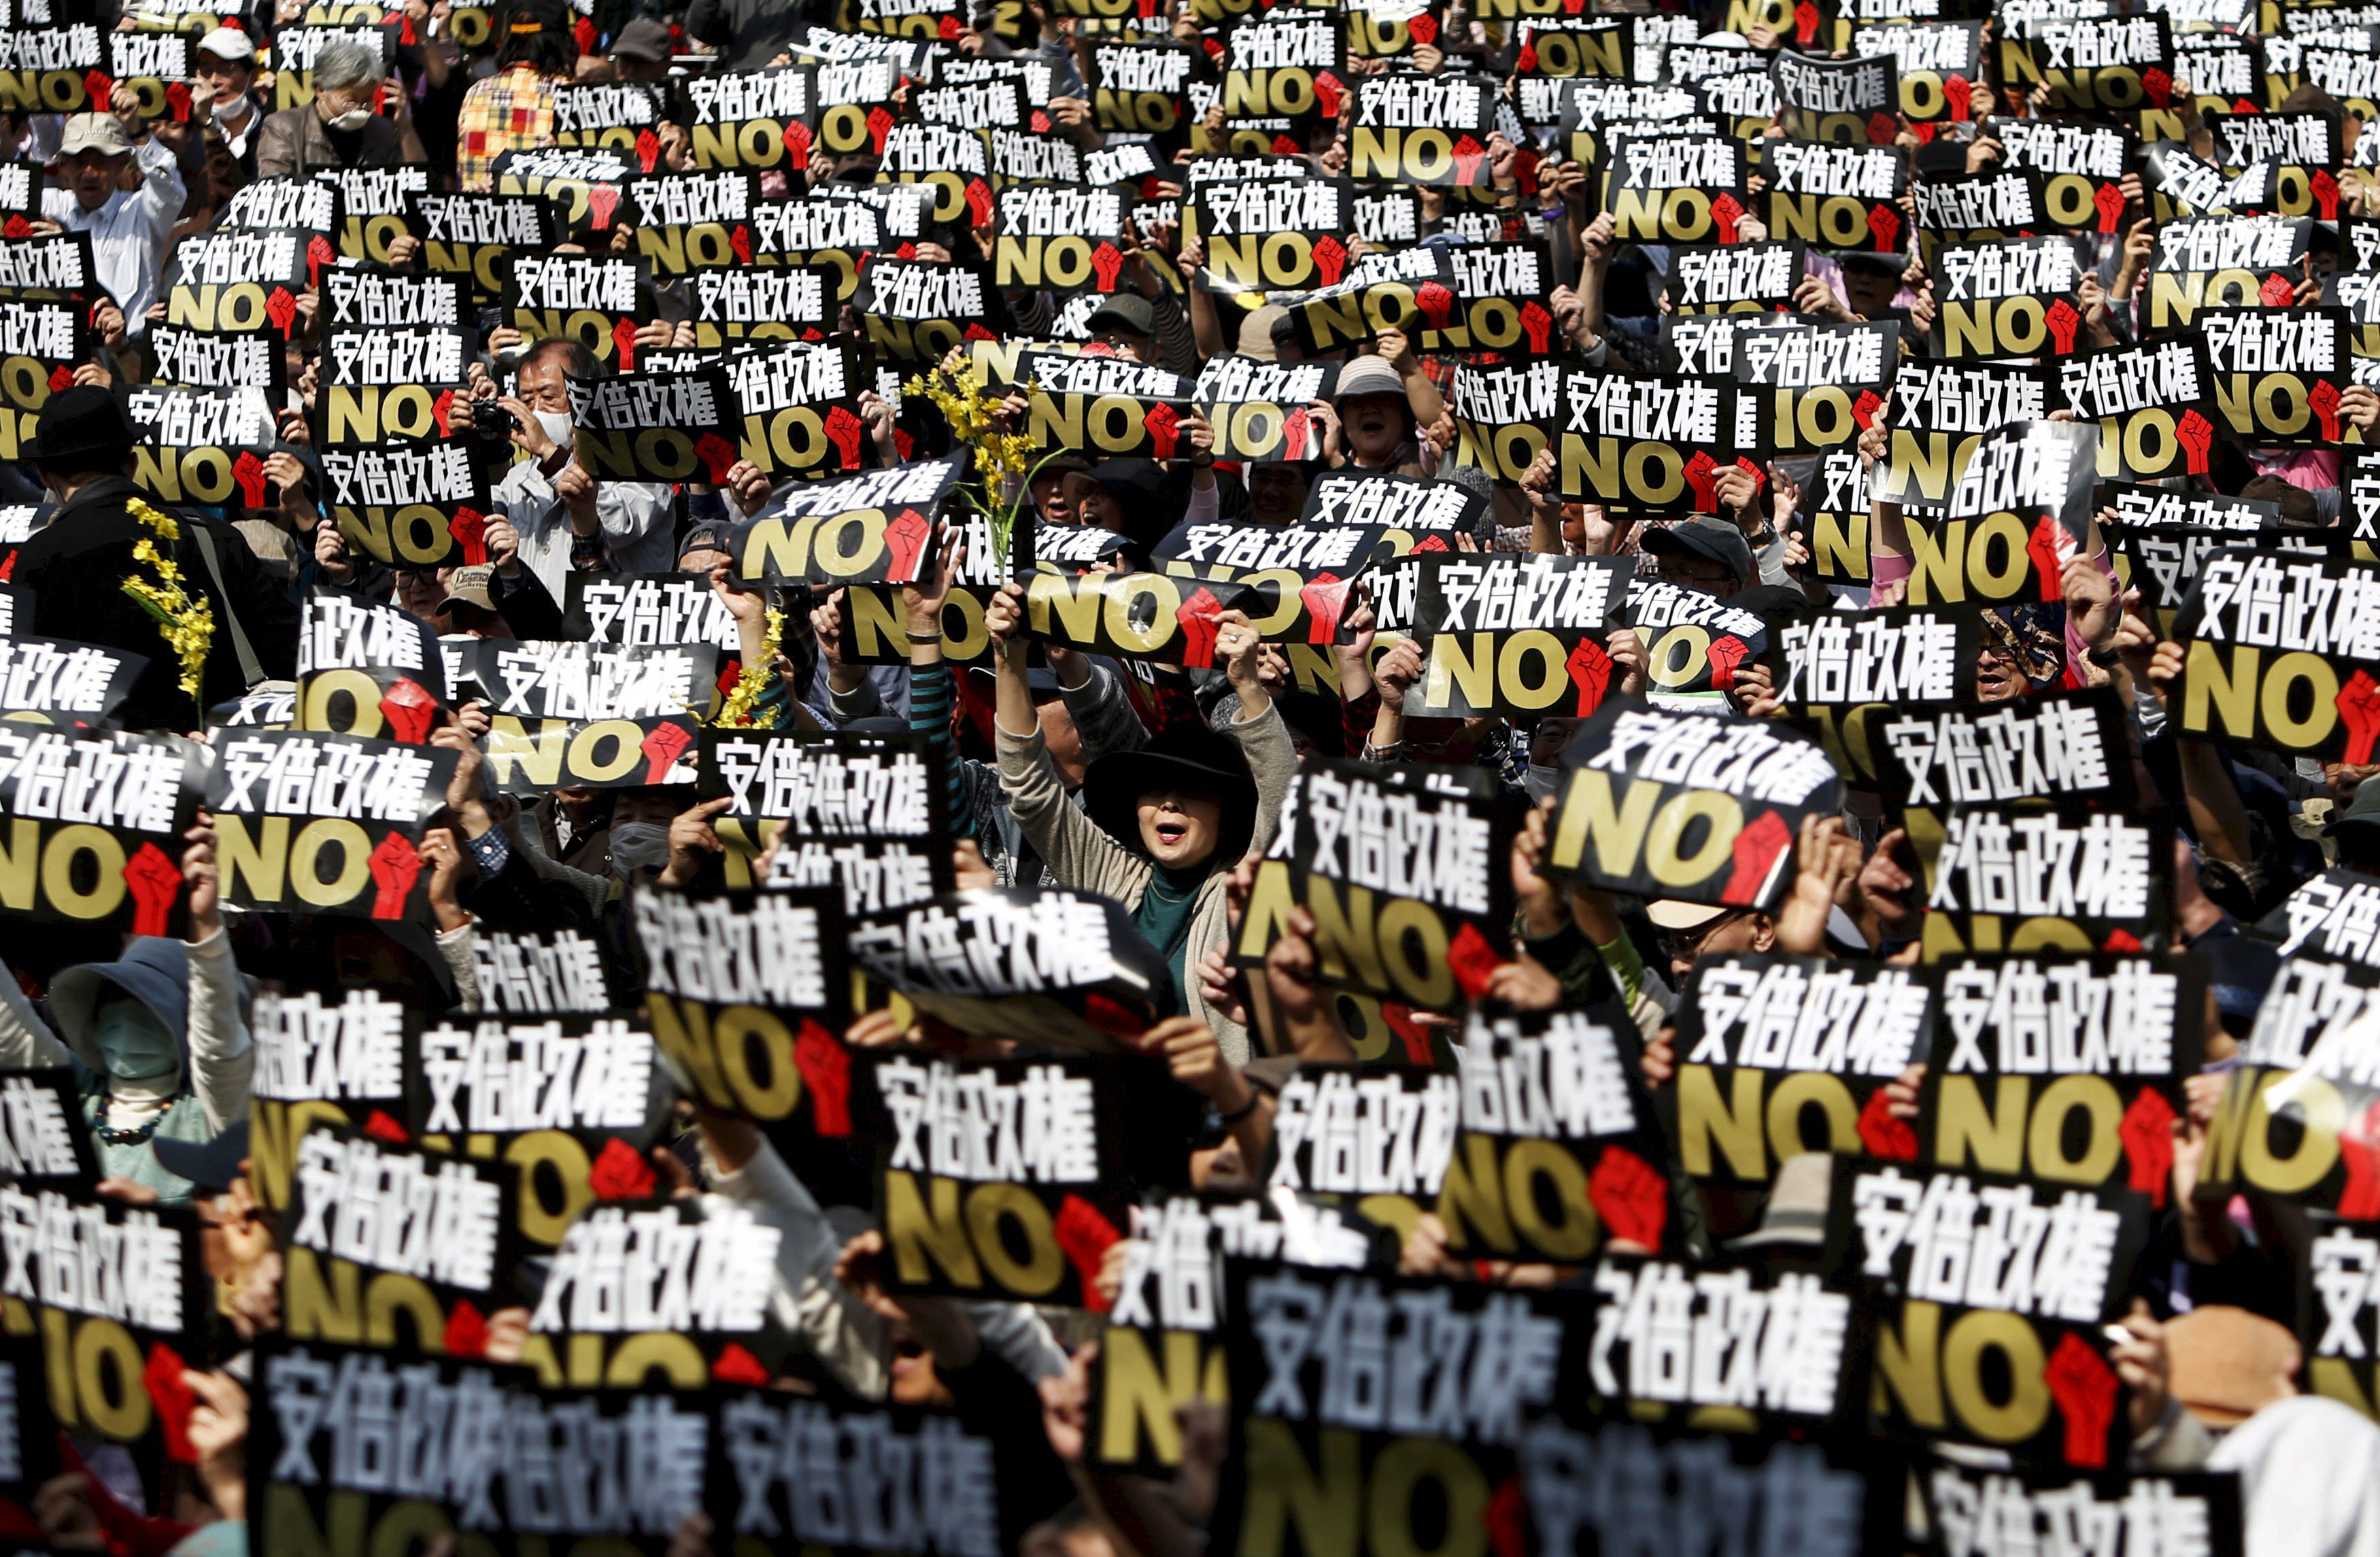 Summer of dissent: Protesters shout slogans at a rally against Prime Minister Shinzo Abe's administration in Tokyo in March. | REUTERS